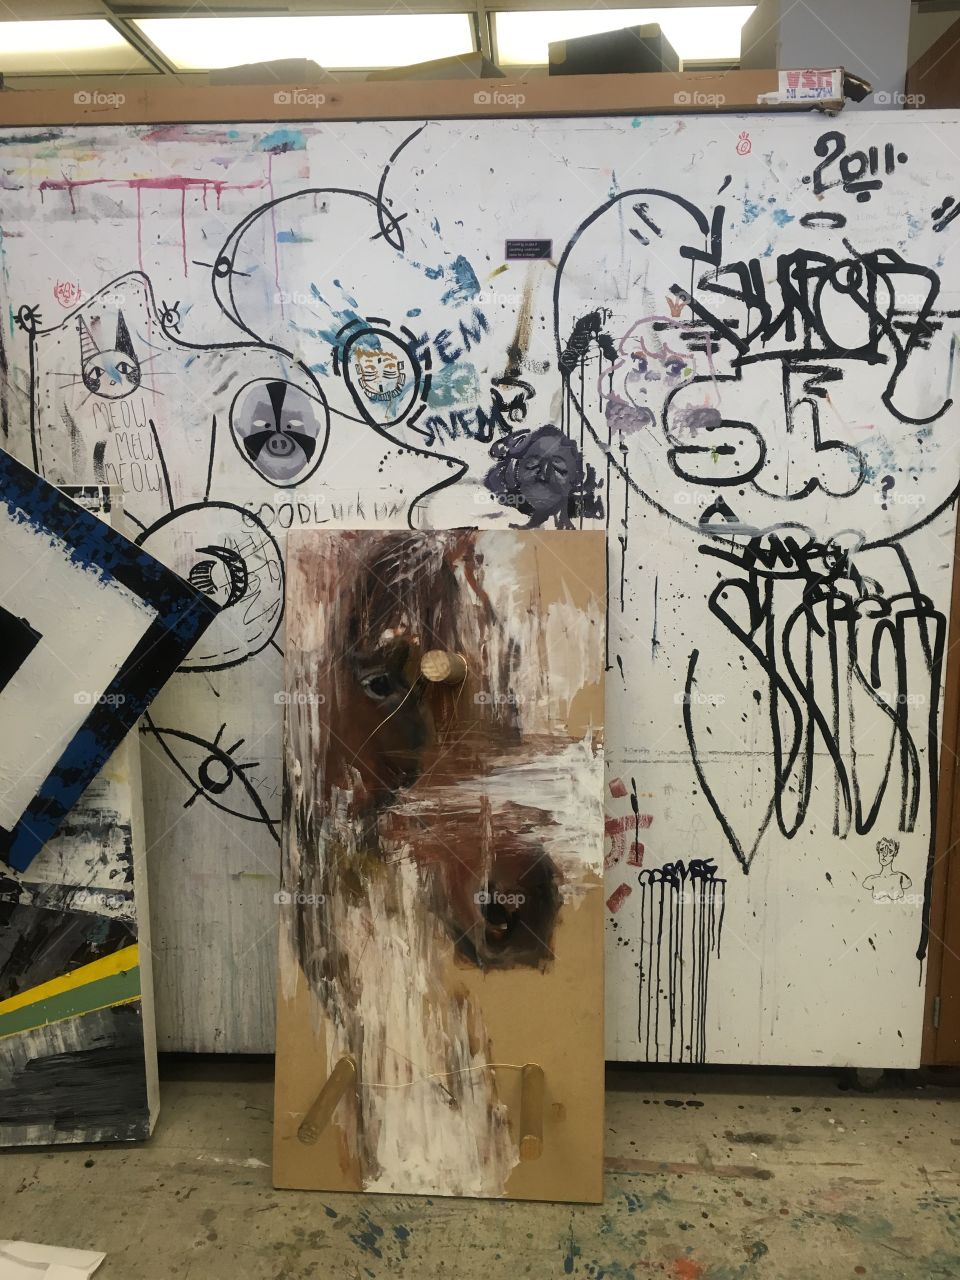 A worn wooden wall covered in various artistic and stylistic graffiti tags